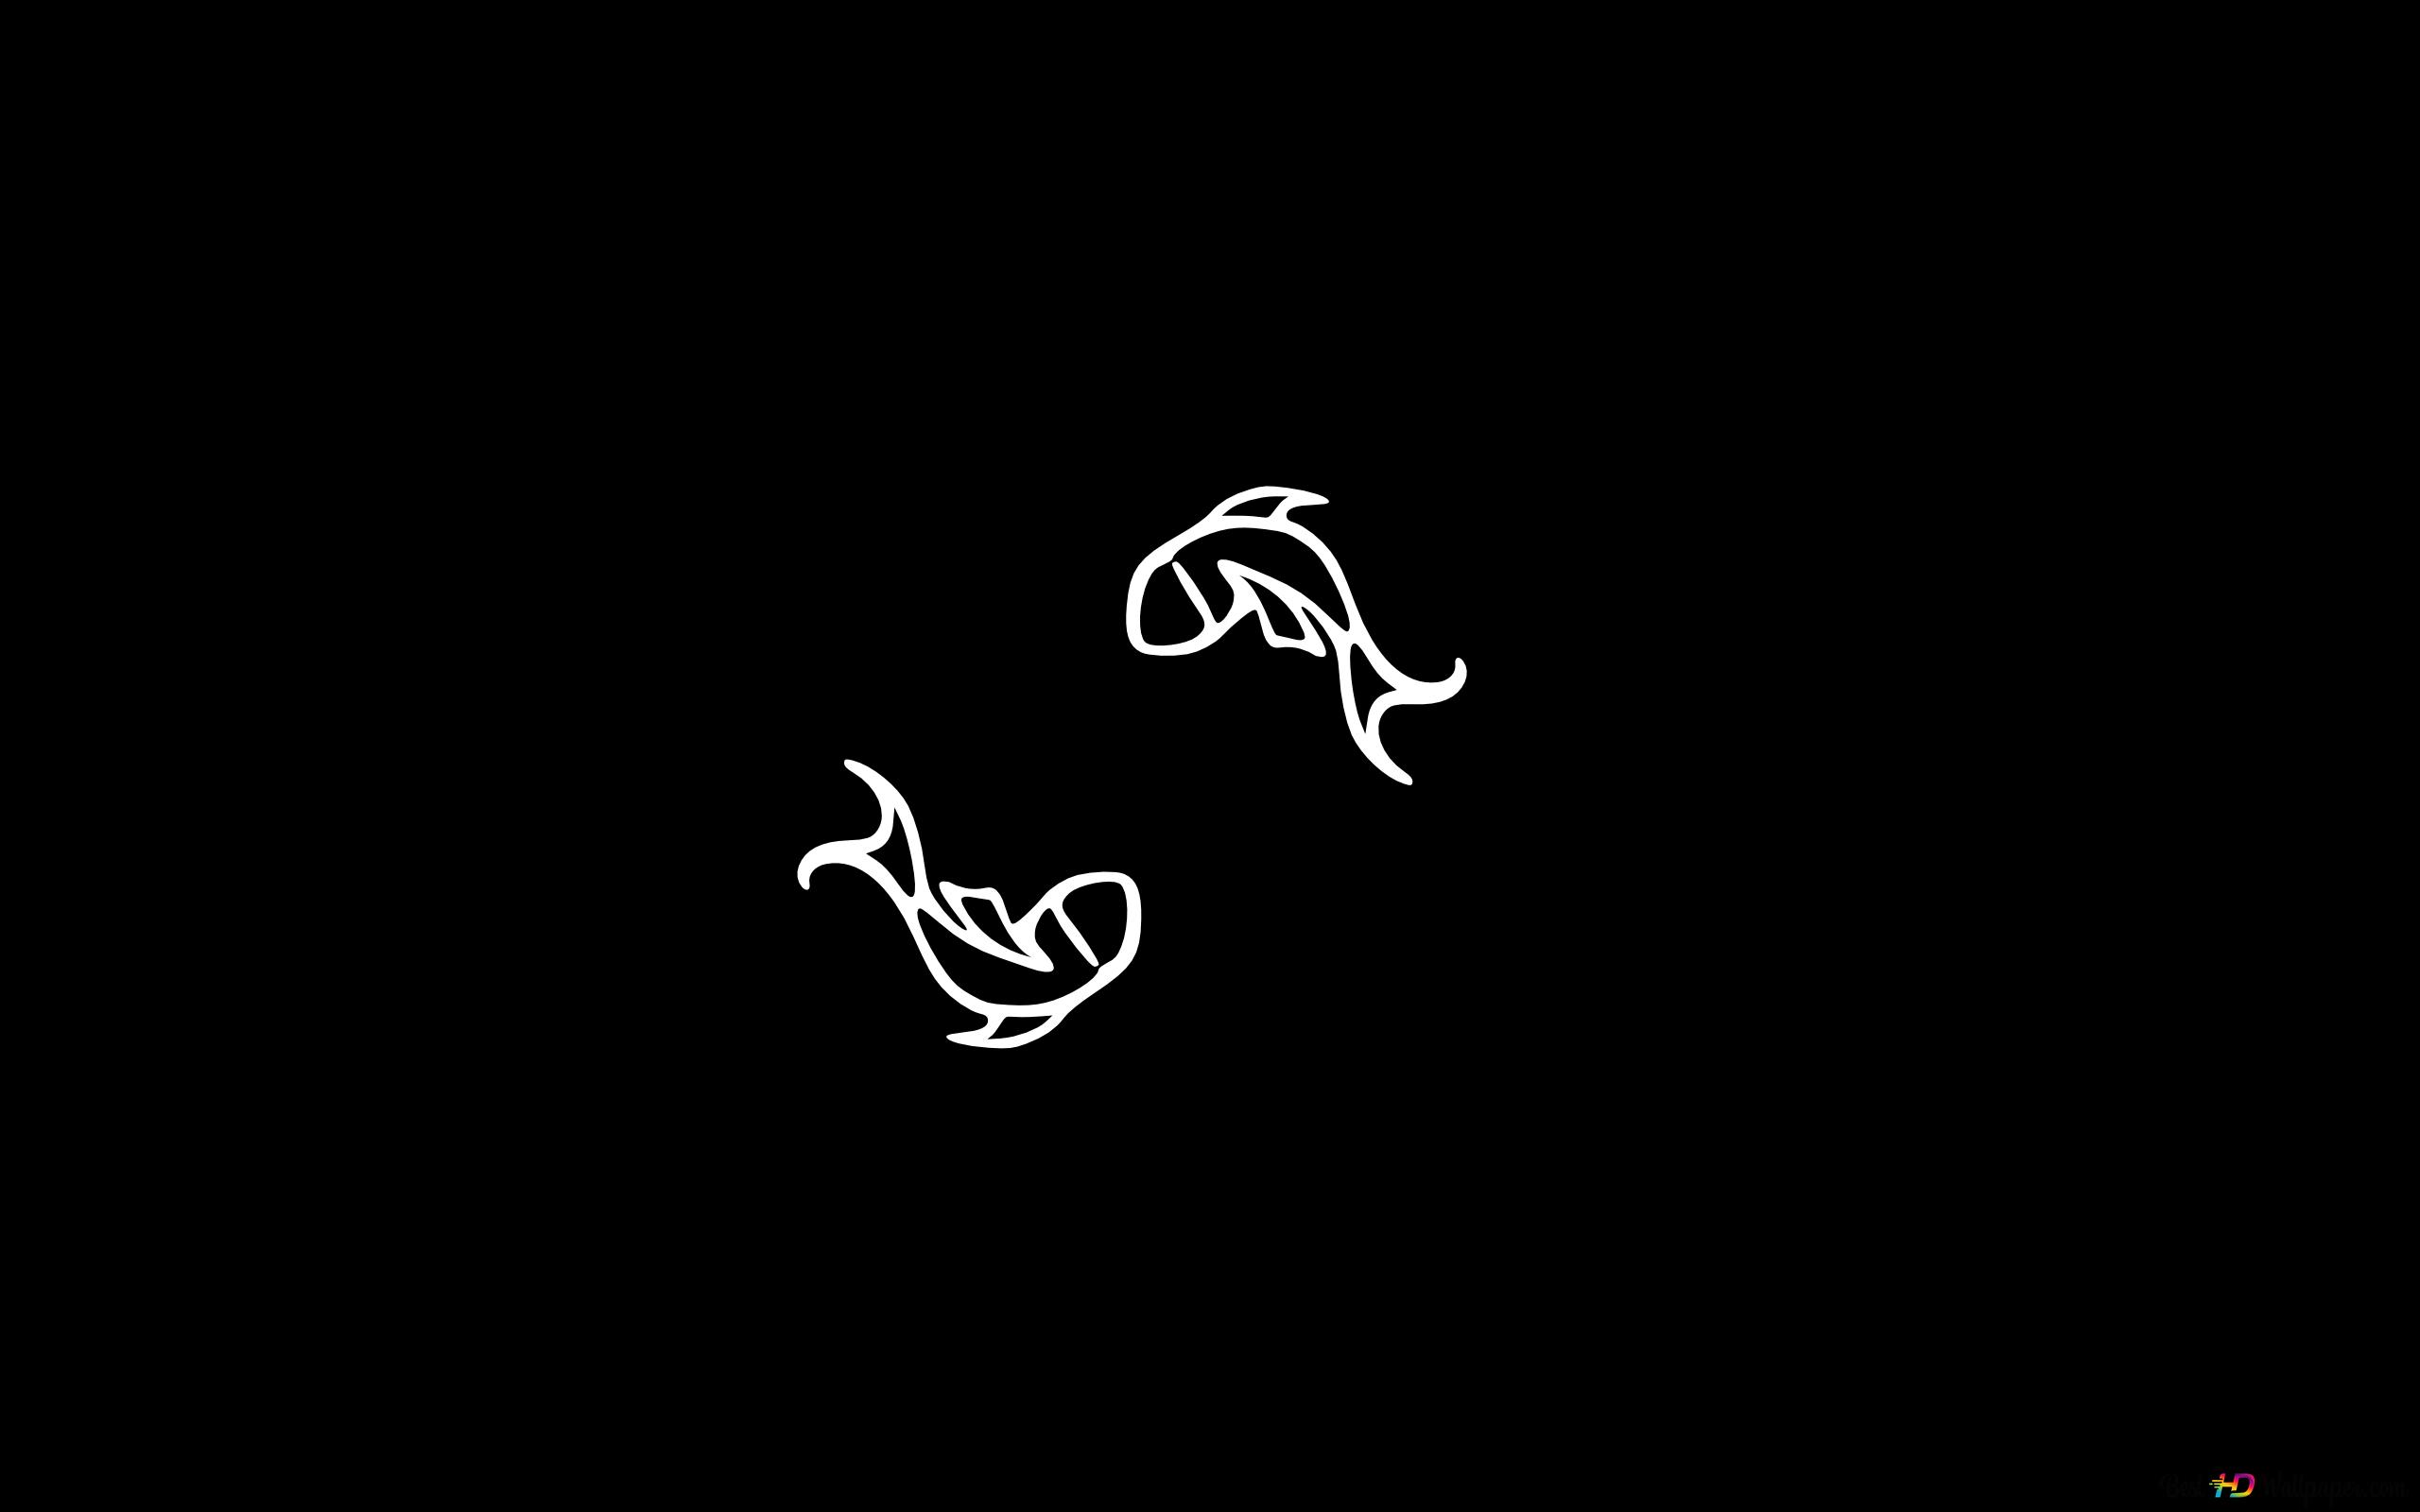 Minimalistic wallpaper with two fish swimming in the dark - Pisces